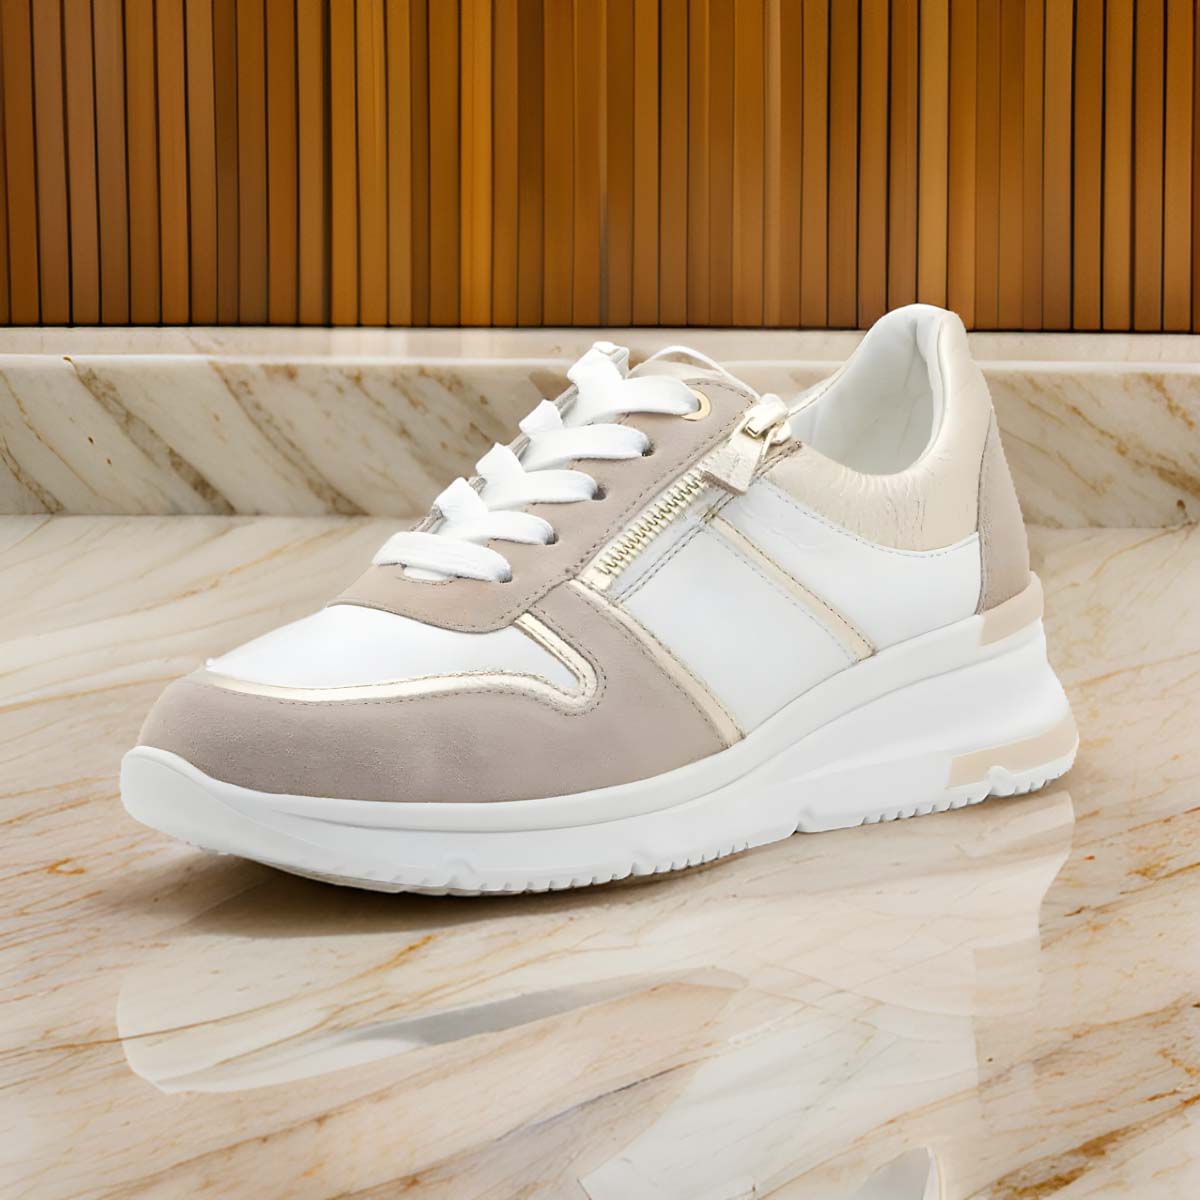 Front view of Ara Neapel Tron White Leather Wedge Trainers with beige suede and gold accents.